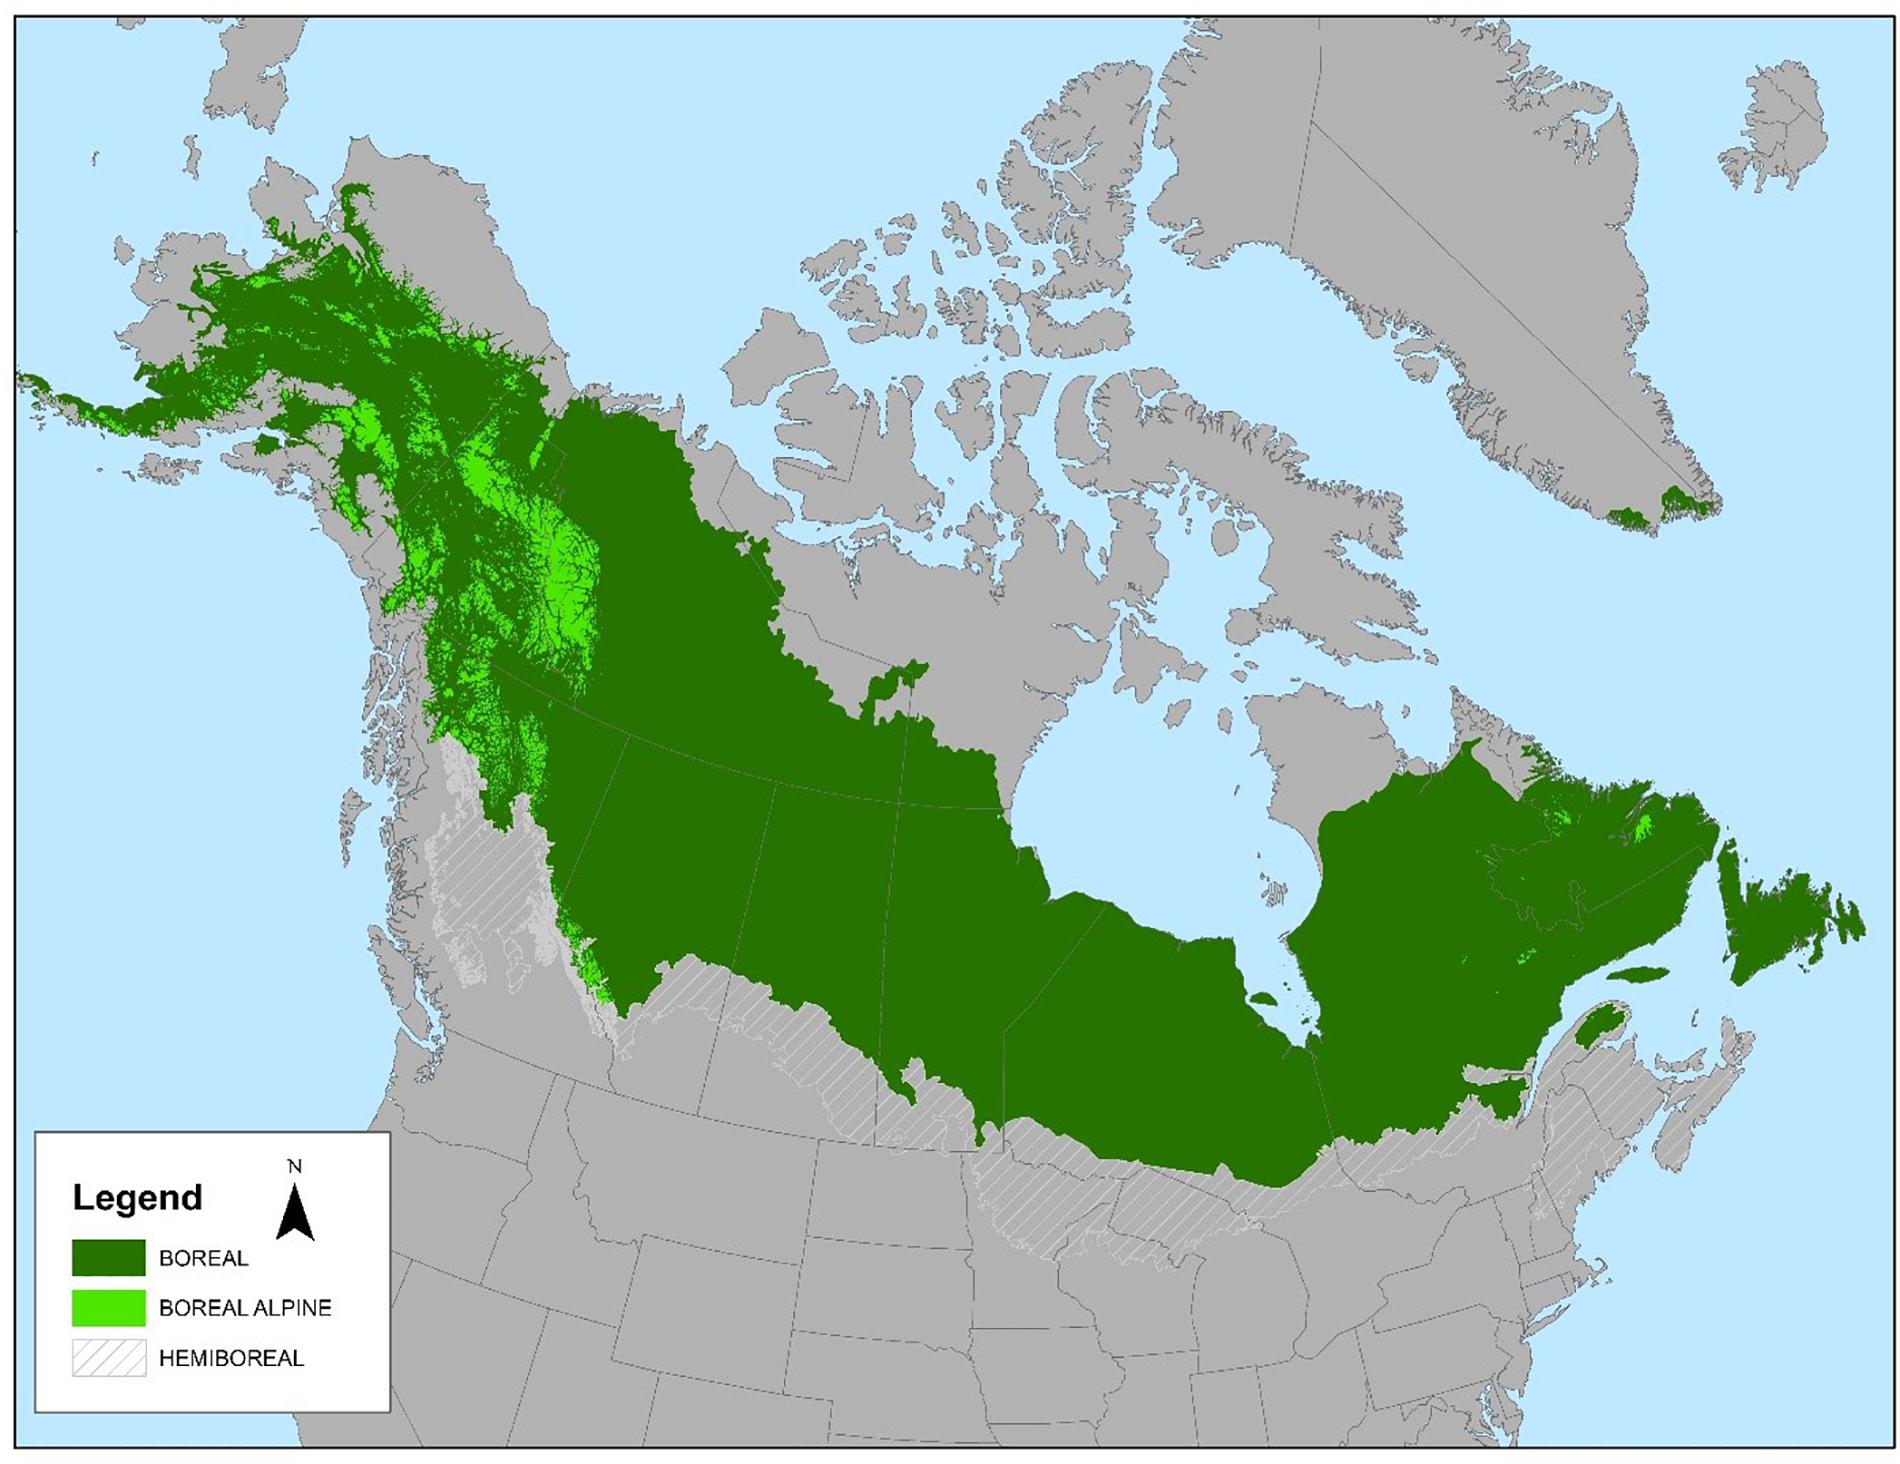 The boreal forest